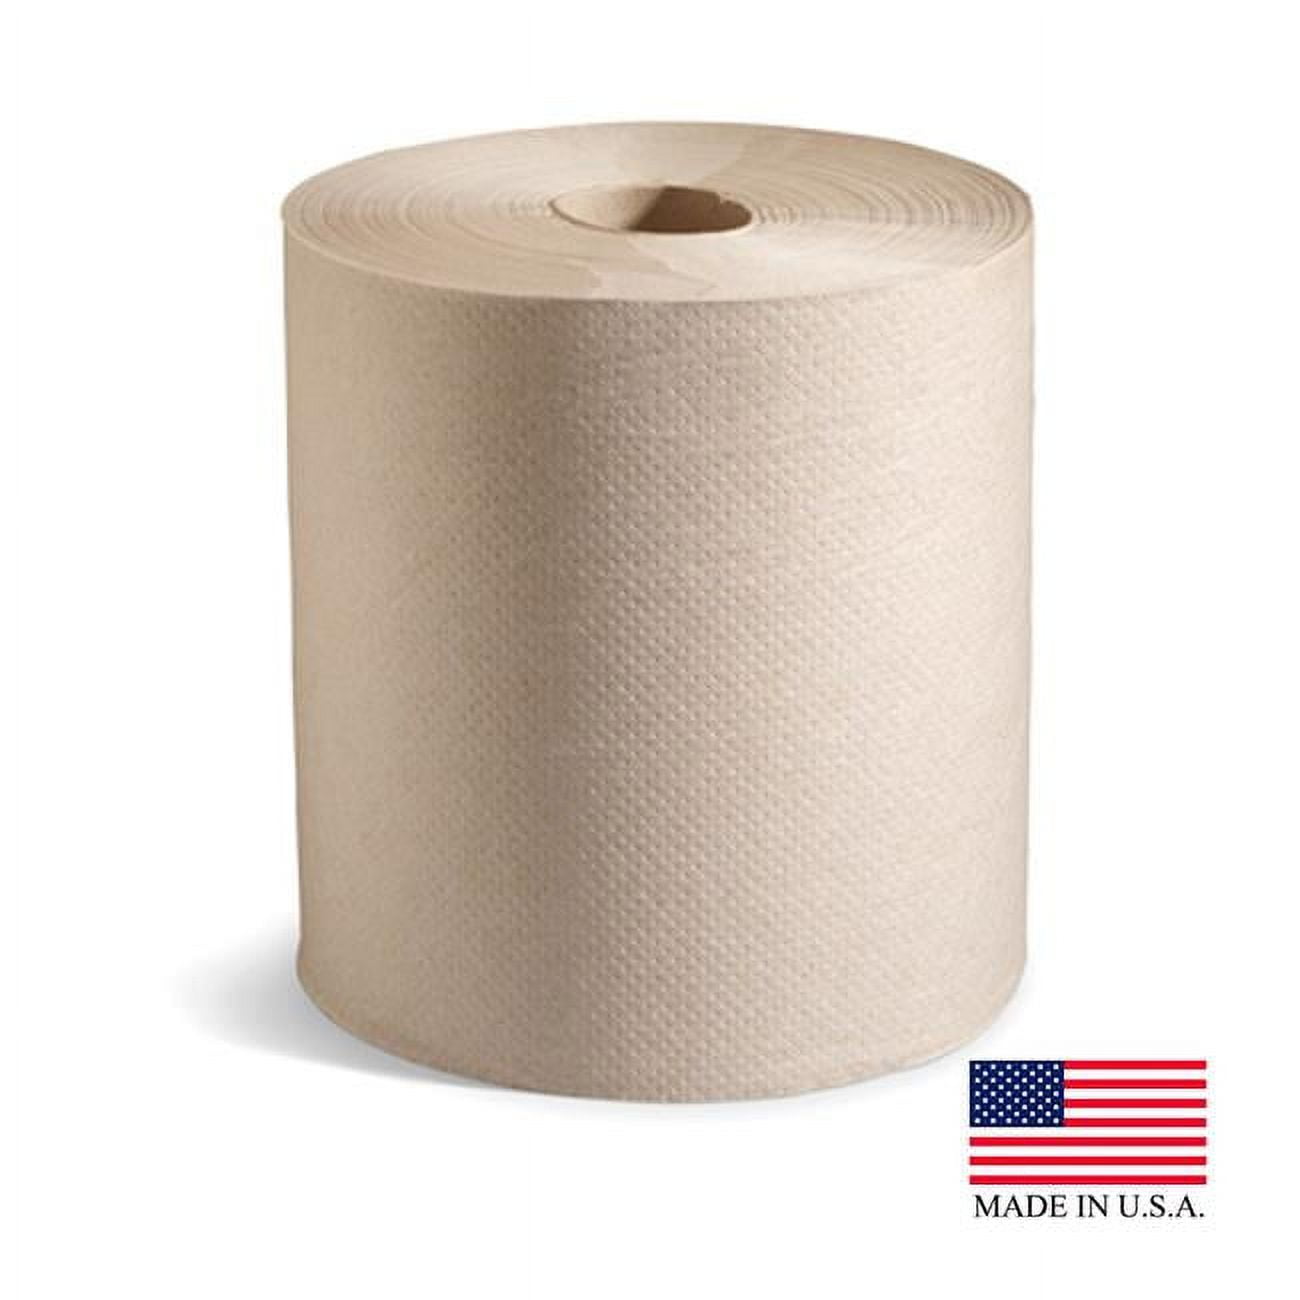 P-726-n Pe 8 In. X 600 Ft. Natural Hard Wound Roll Towel - Pack Of 12